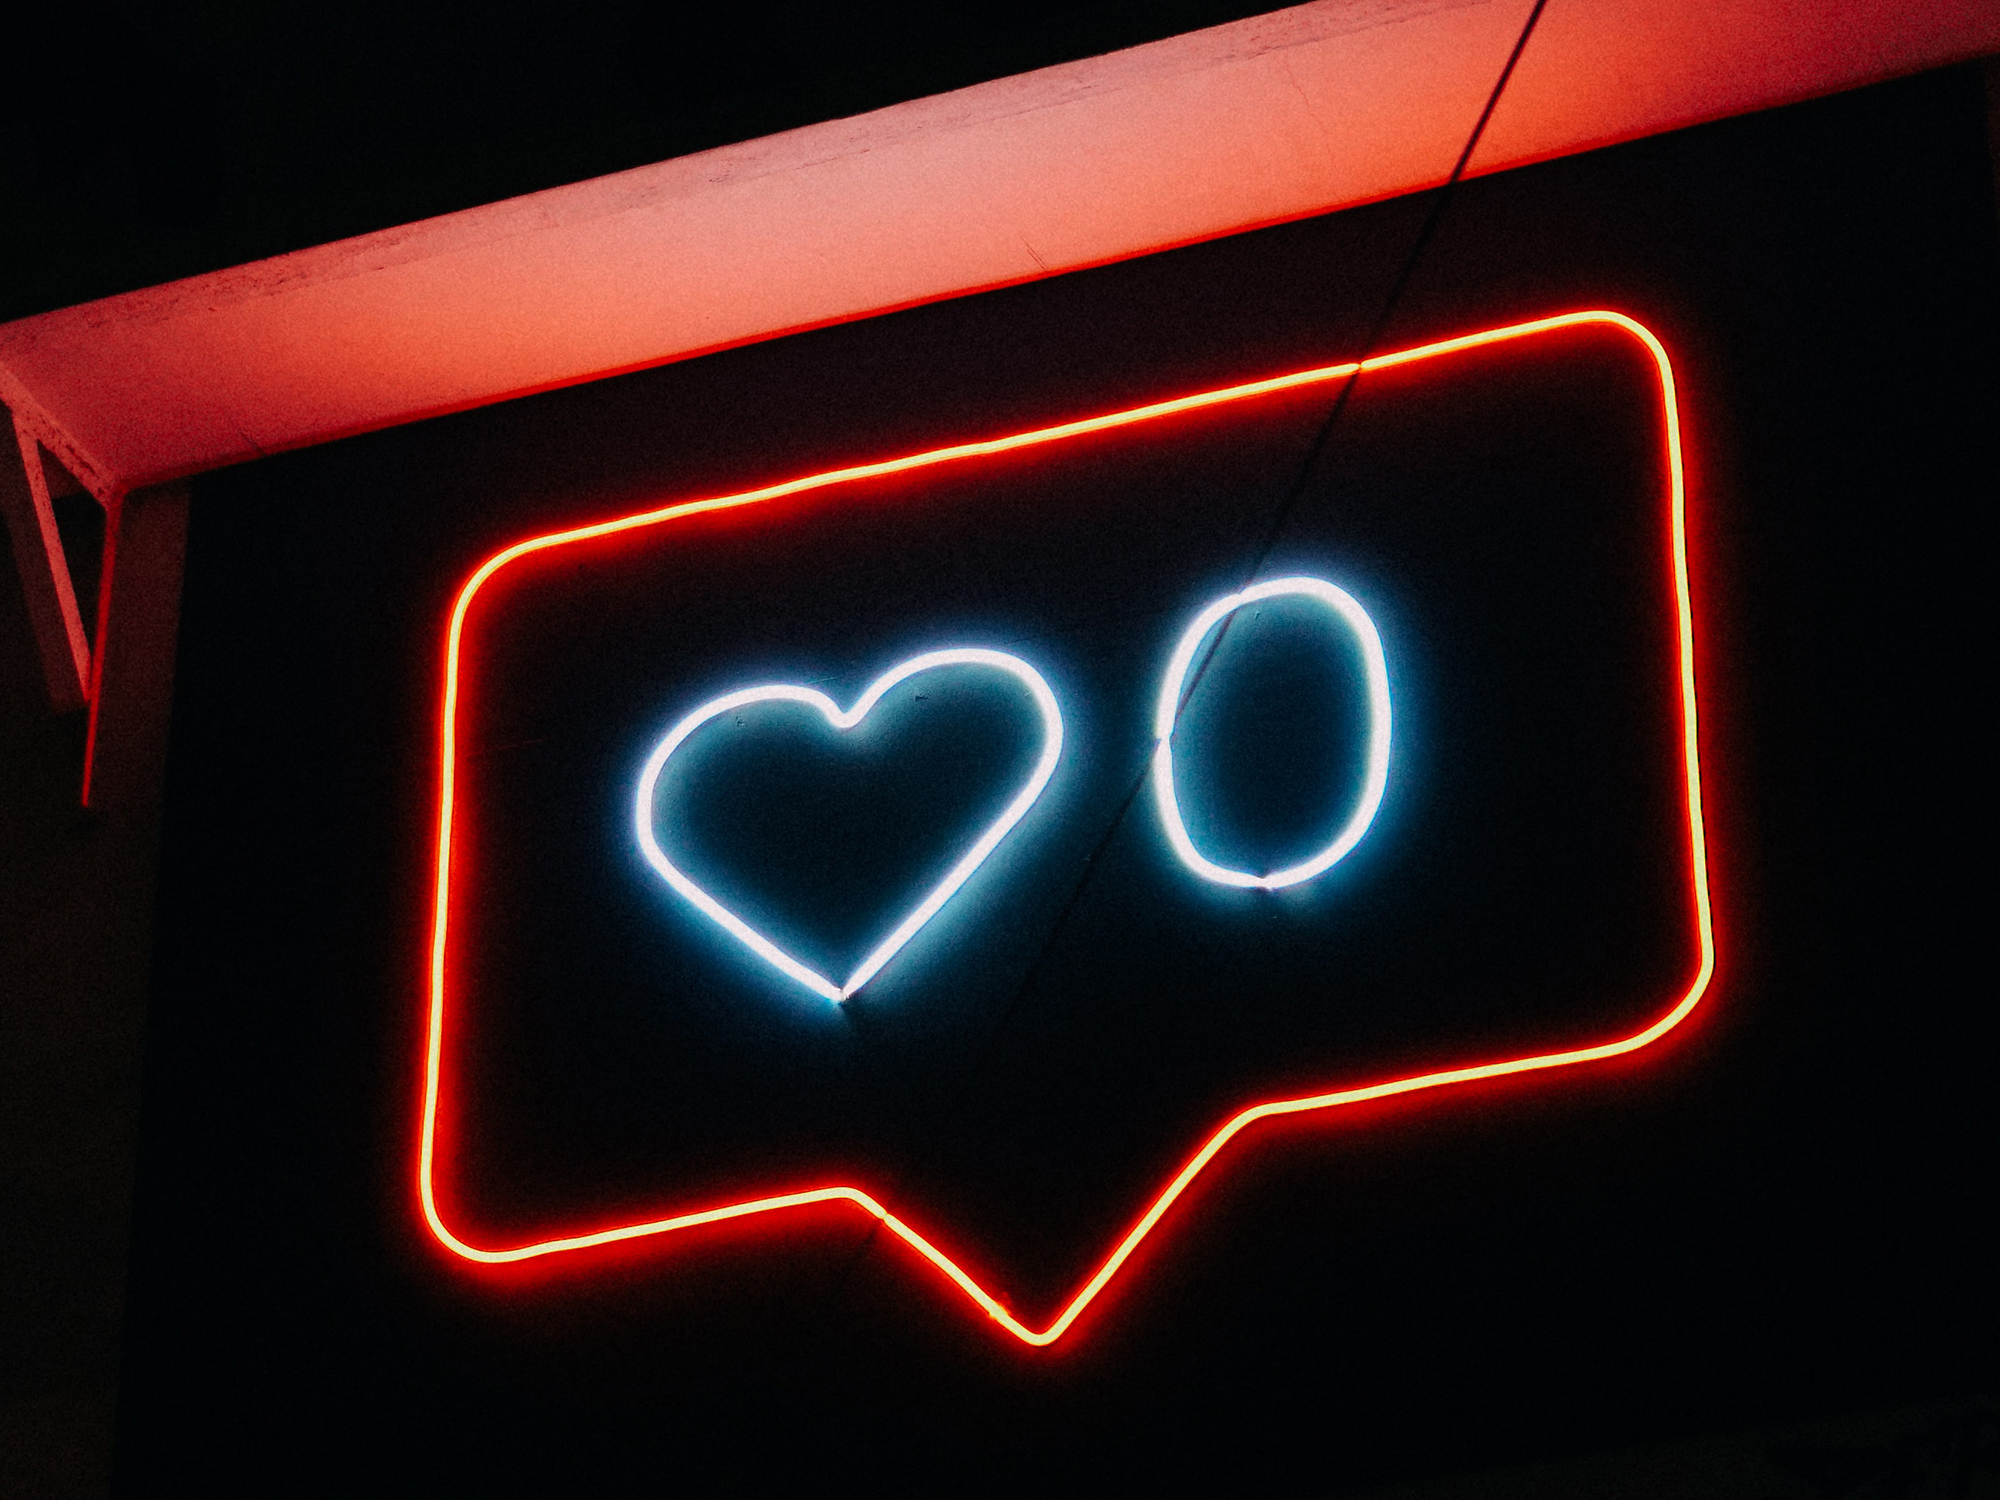 neon sign depicting an instagram like notification bubble with a zero